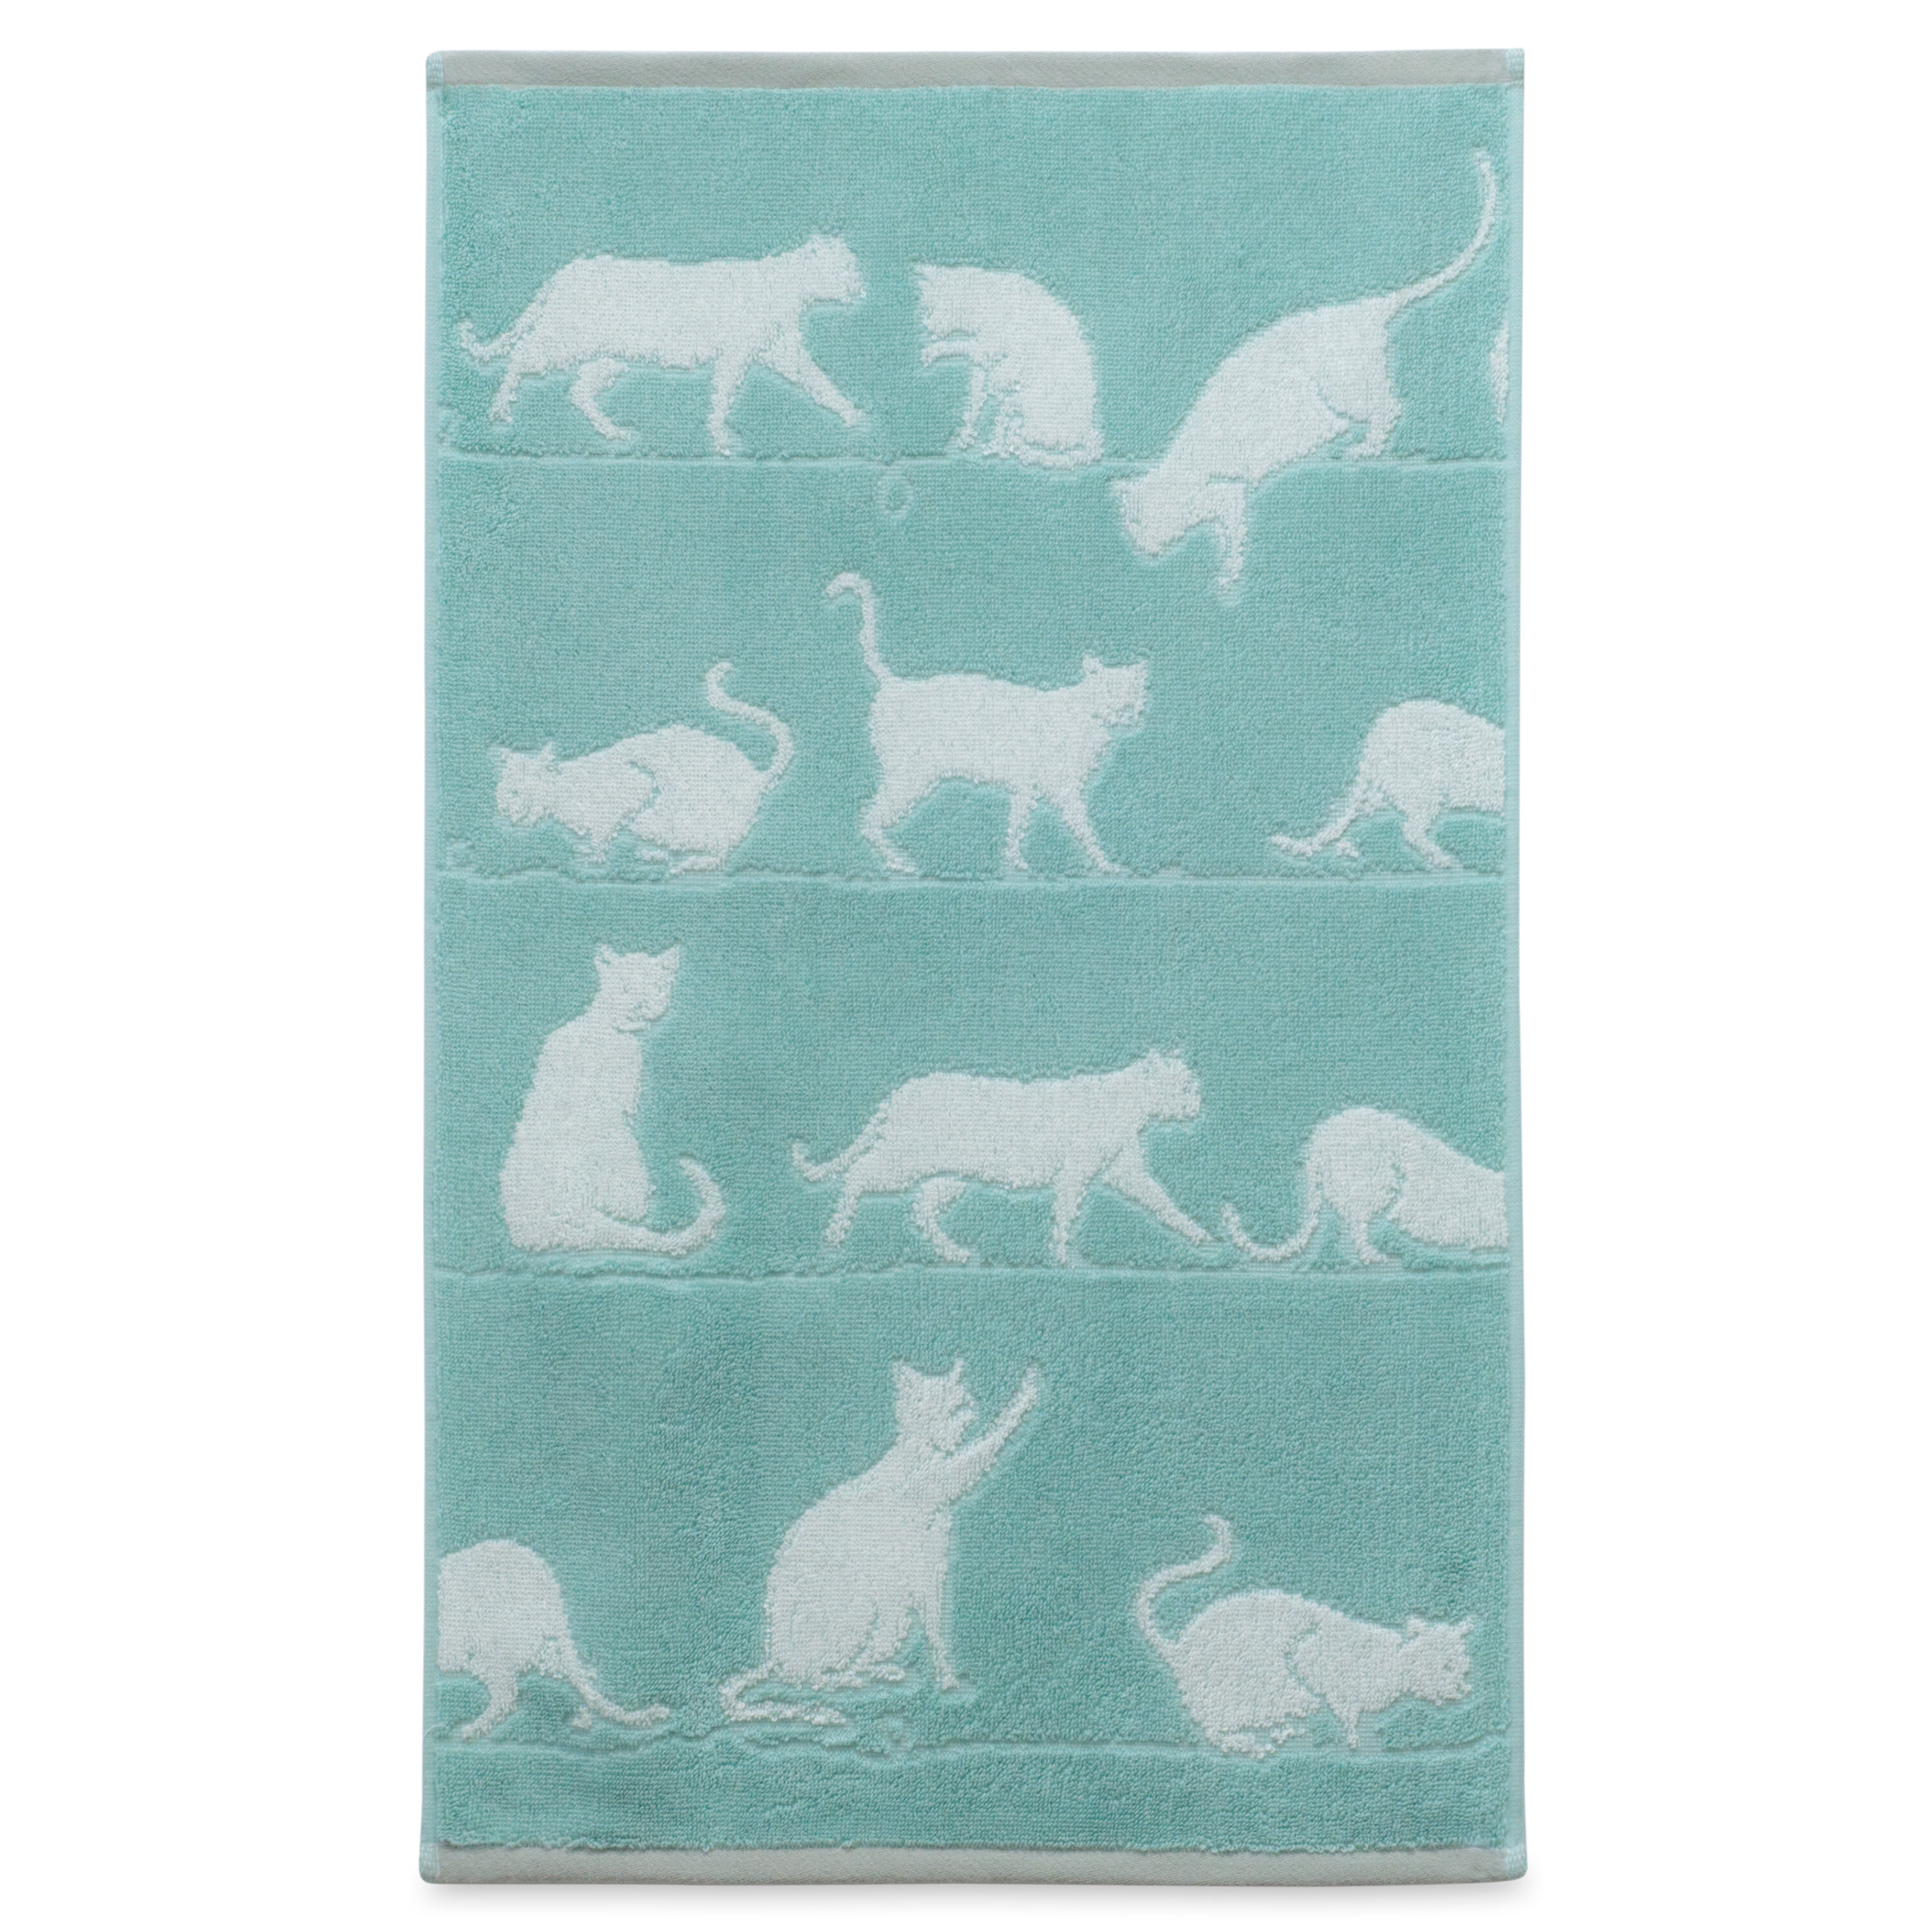 CAT KITTEN CLOTHESLINE NEW BATHROOM KITCHEN TOWEL EMBROIDERED BY LAURA 